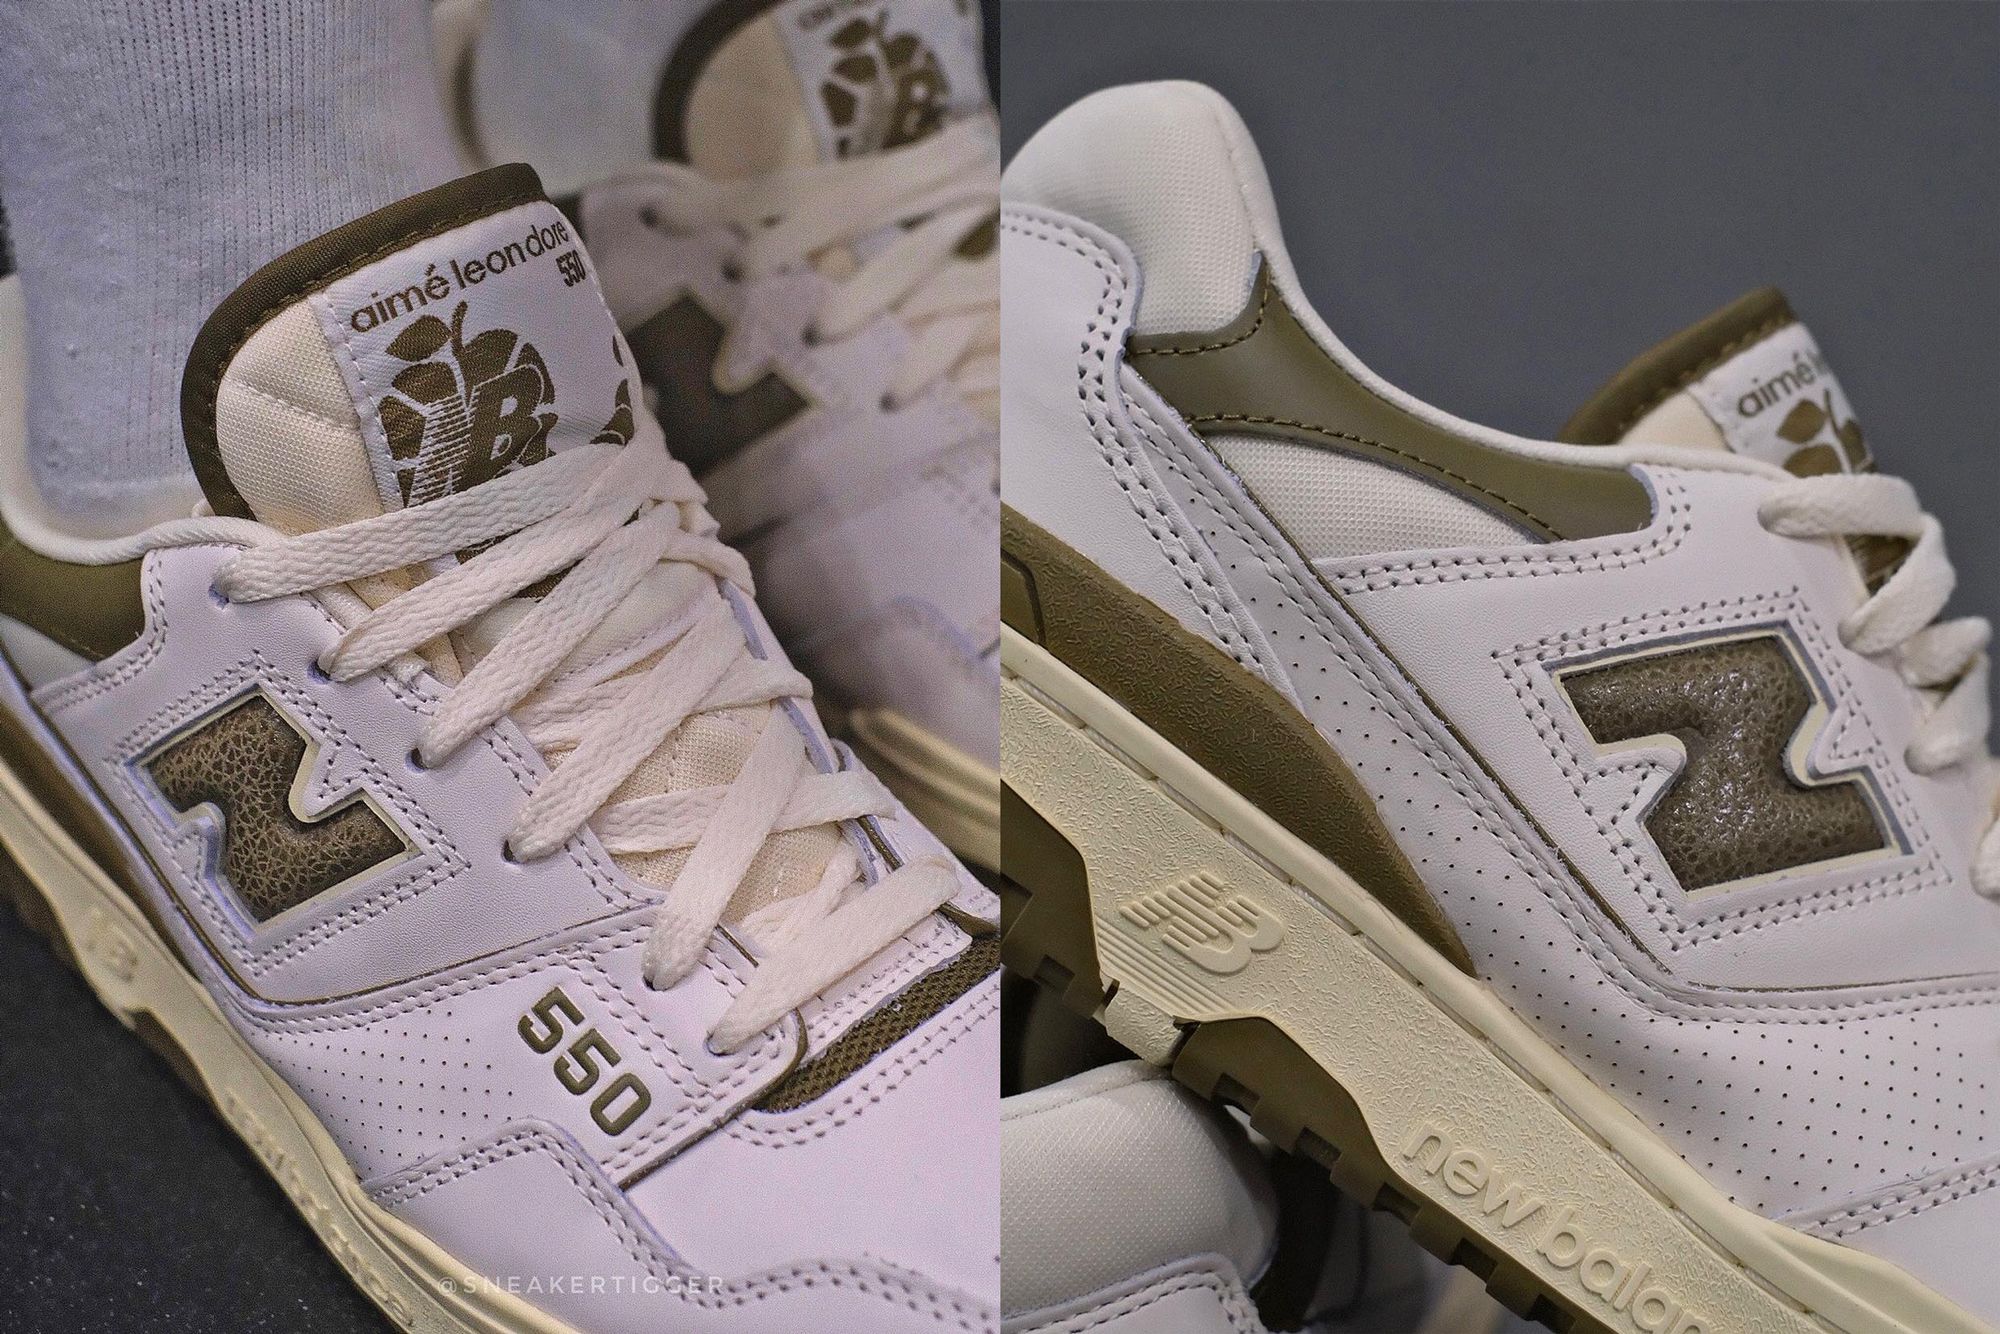 Up Close with the Aimé Leon Dore x New Balance 550 in White and